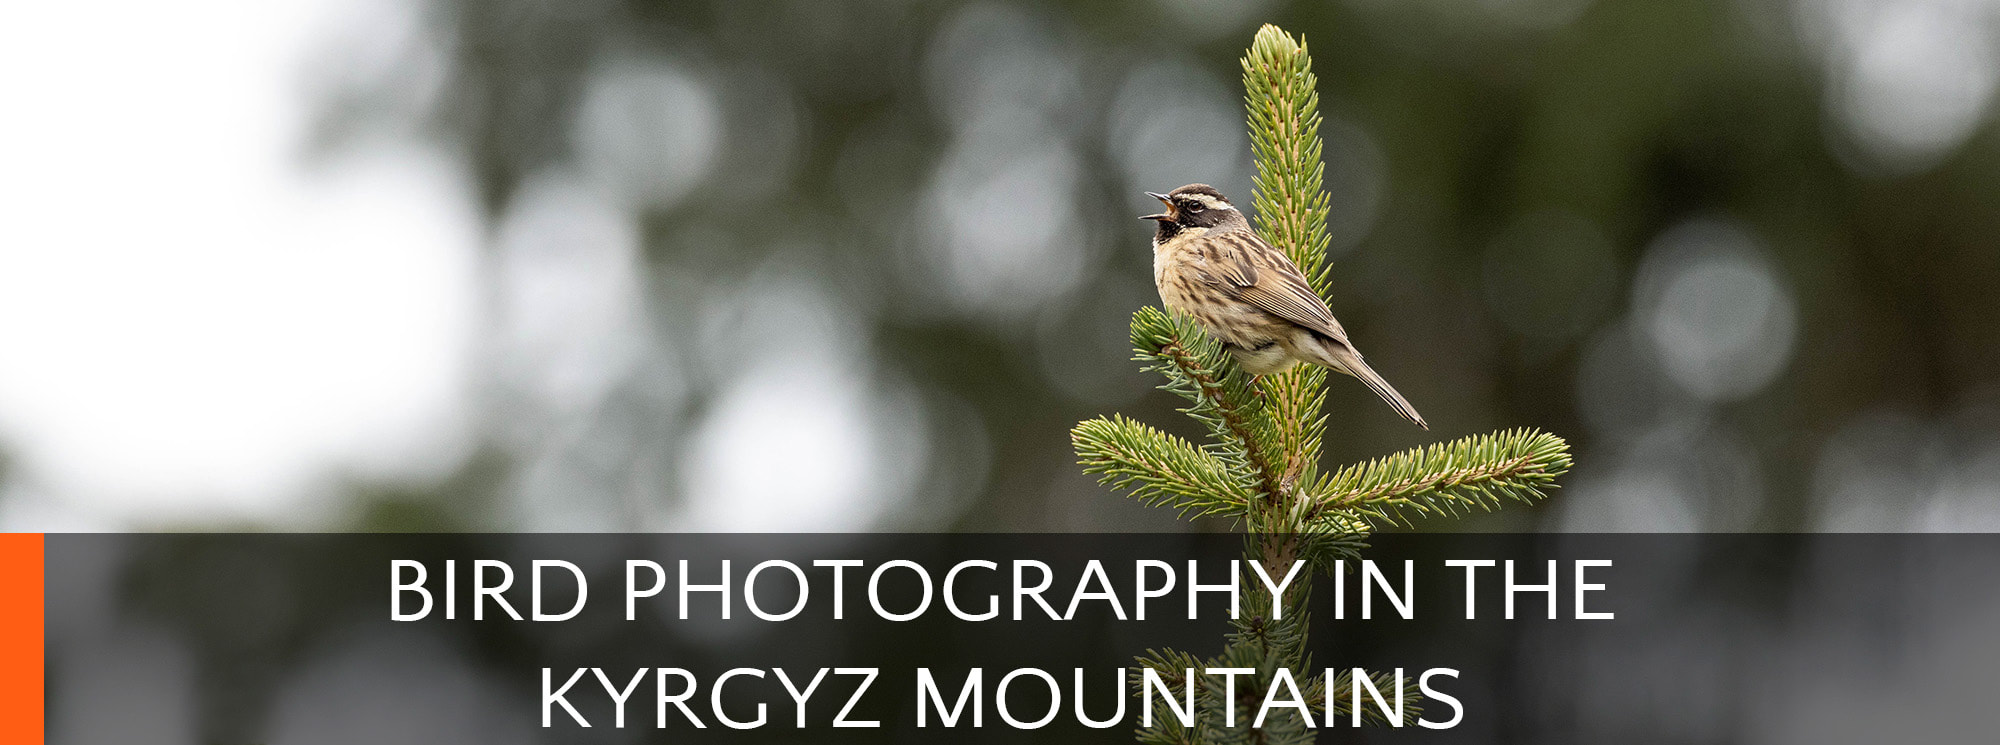 Singing Black-throated accentor at the top of a spruce, in Kyrgyzstan.